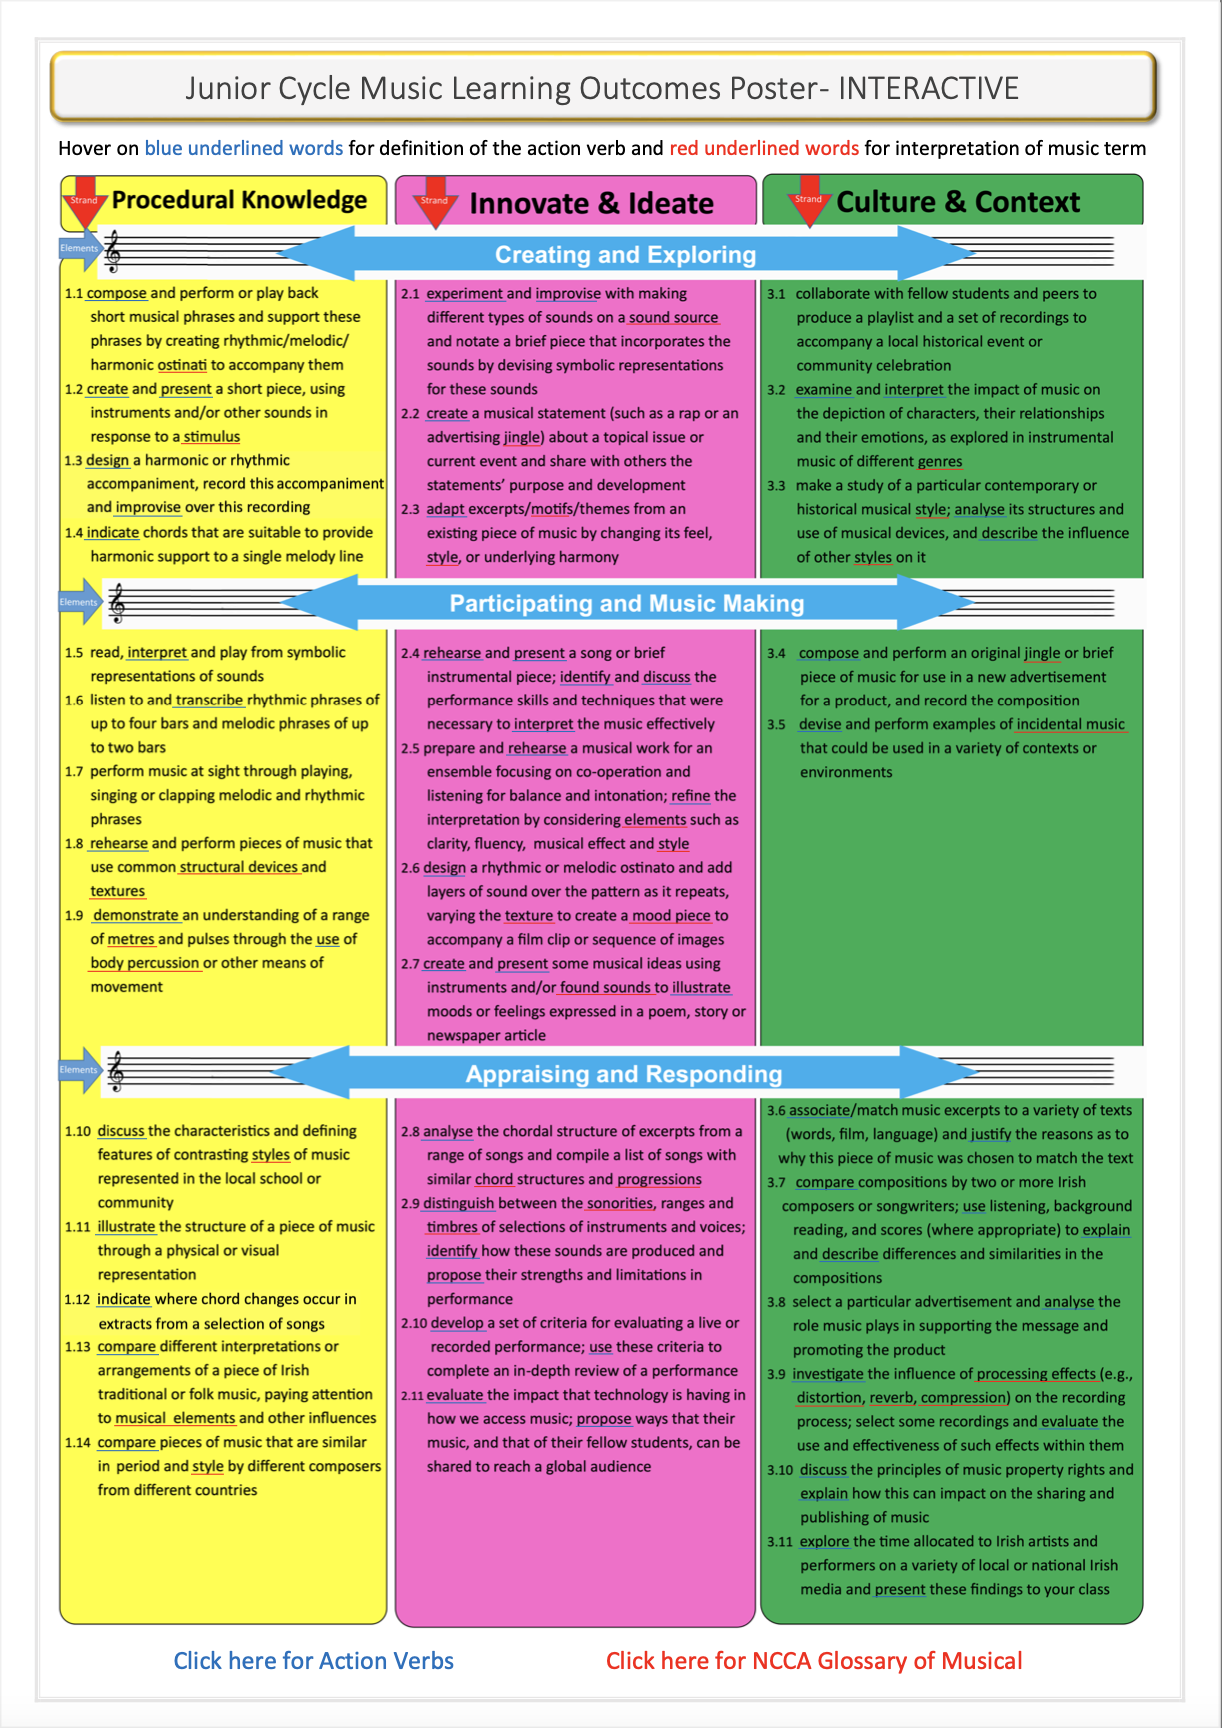 Interactive Learning Outcomes Poster